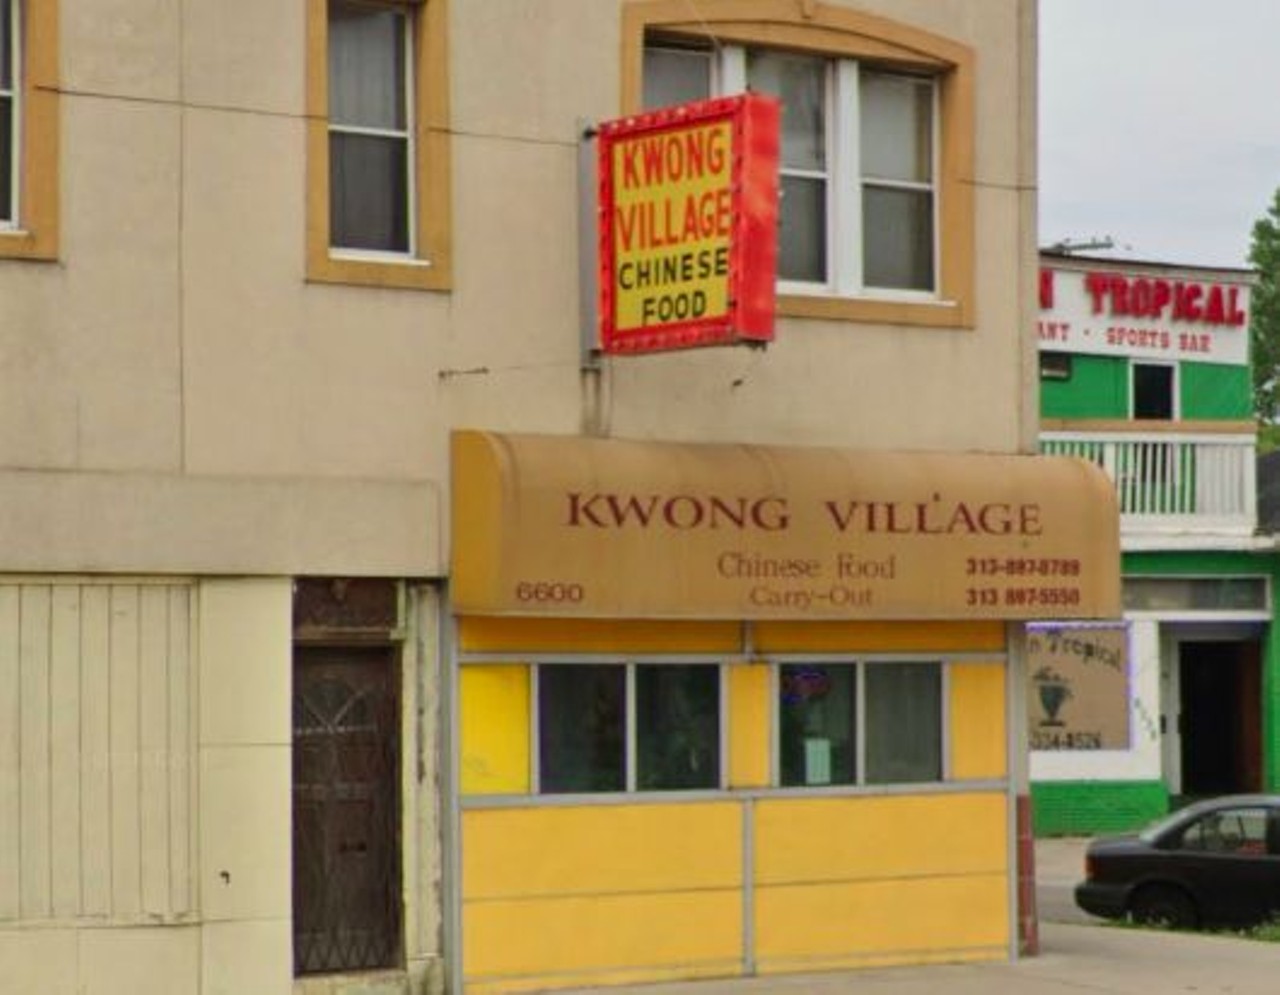 Kwong Village
6600 Michigan Ave., Detroit; 313-897-8789
Kwong&#146;s food and customer service has helped the eatery to establish itself as a go-to spot for quality takeout and dine-in services.
Photo via Google Maps